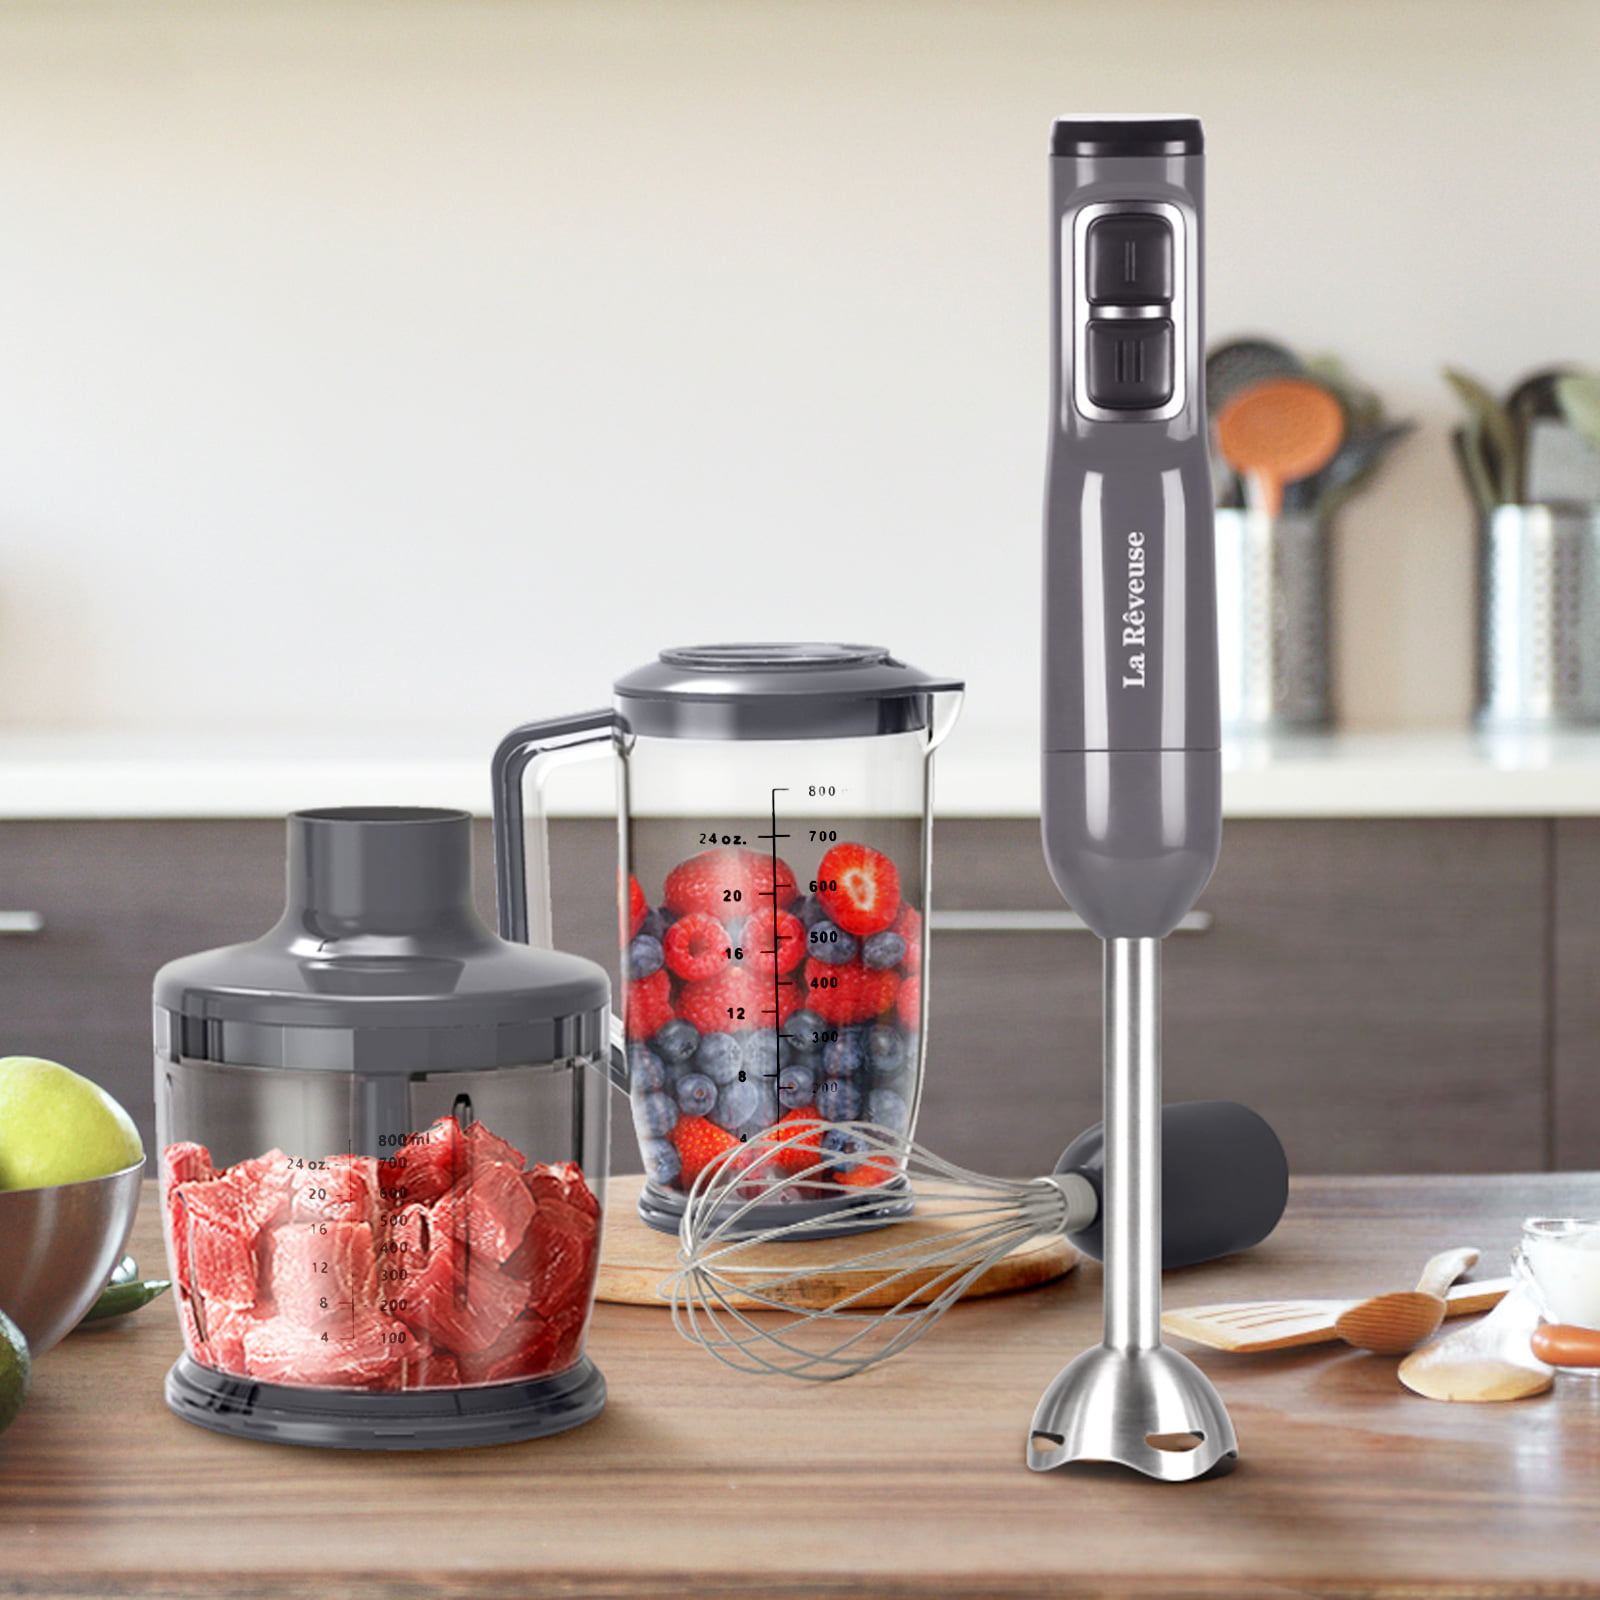  Immersion Hand Blender: 3-Angle Adjustable with Variable  21-Speed Control, Powerful Hand Blender Electric for Milkshakes, Smoothies, Soup, Puree